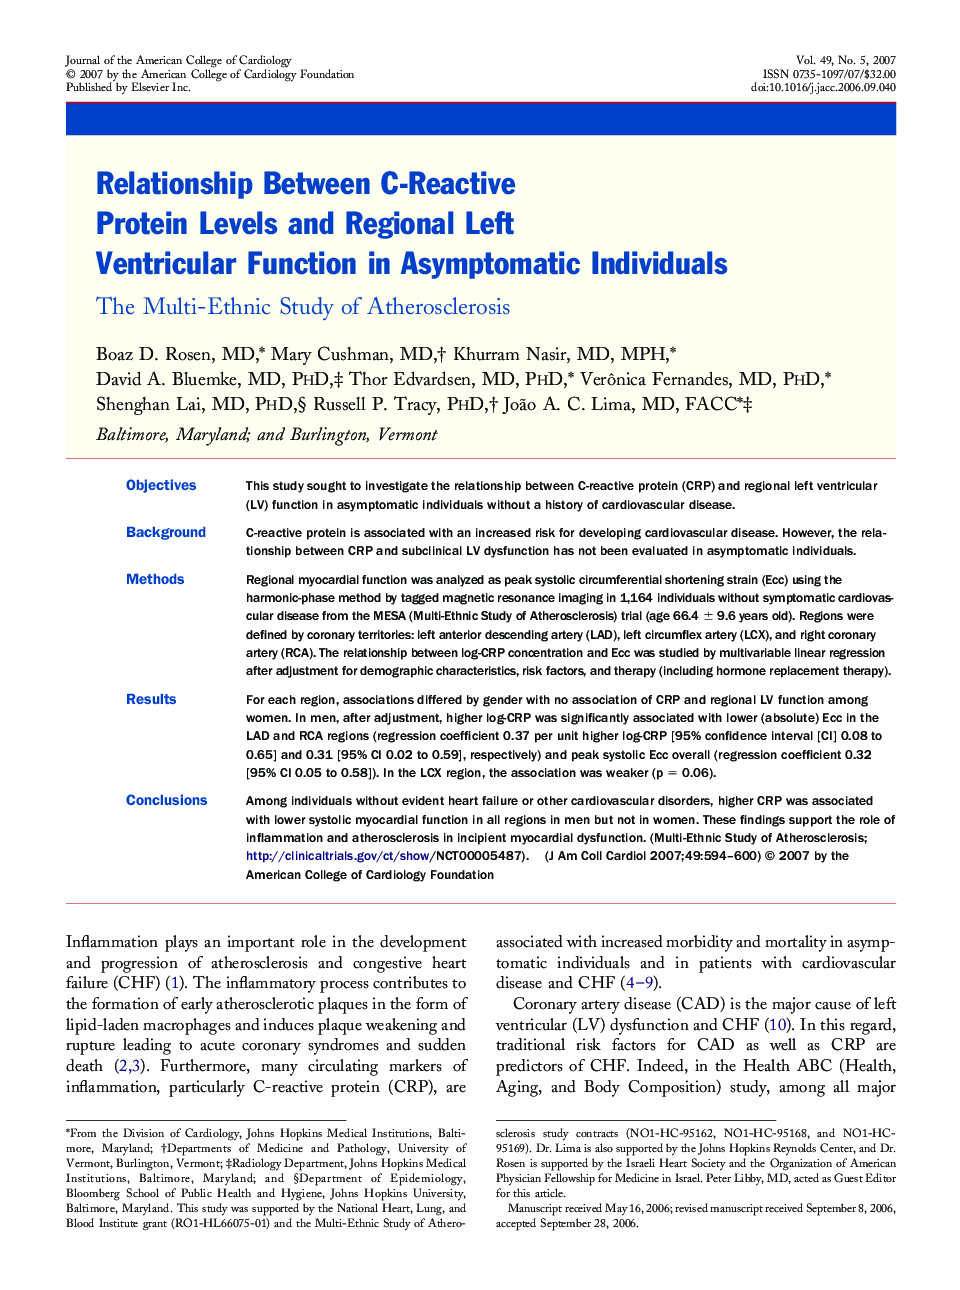 Relationship Between C-Reactive Protein Levels and Regional Left Ventricular Function in Asymptomatic Individuals : The Multi-Ethnic Study of Atherosclerosis